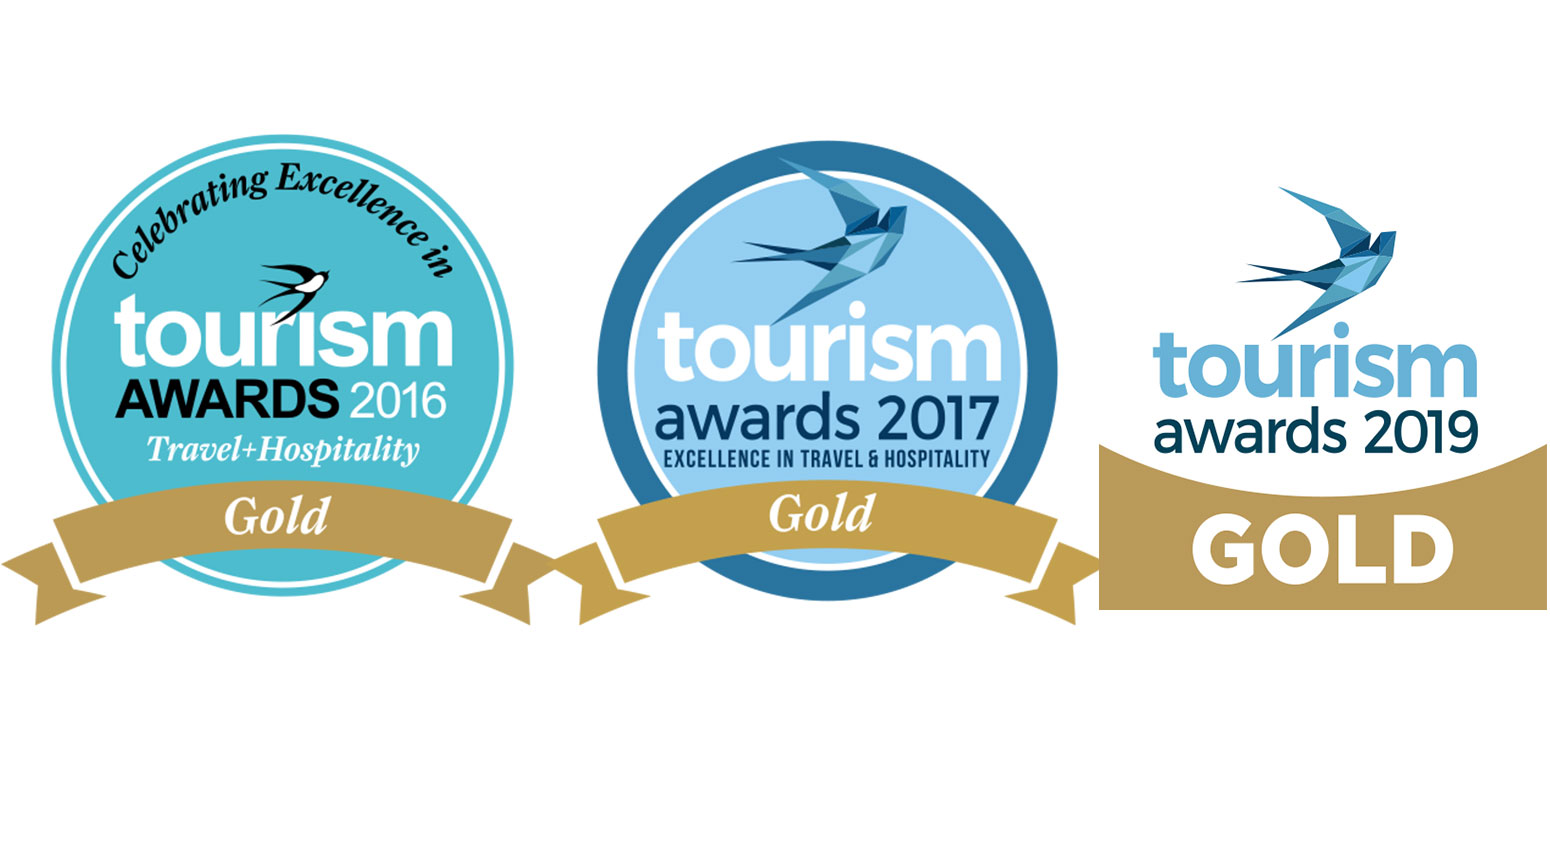 Variety Cruises logo with "Greek Tourism Awards 2019" and "Gold Award" text